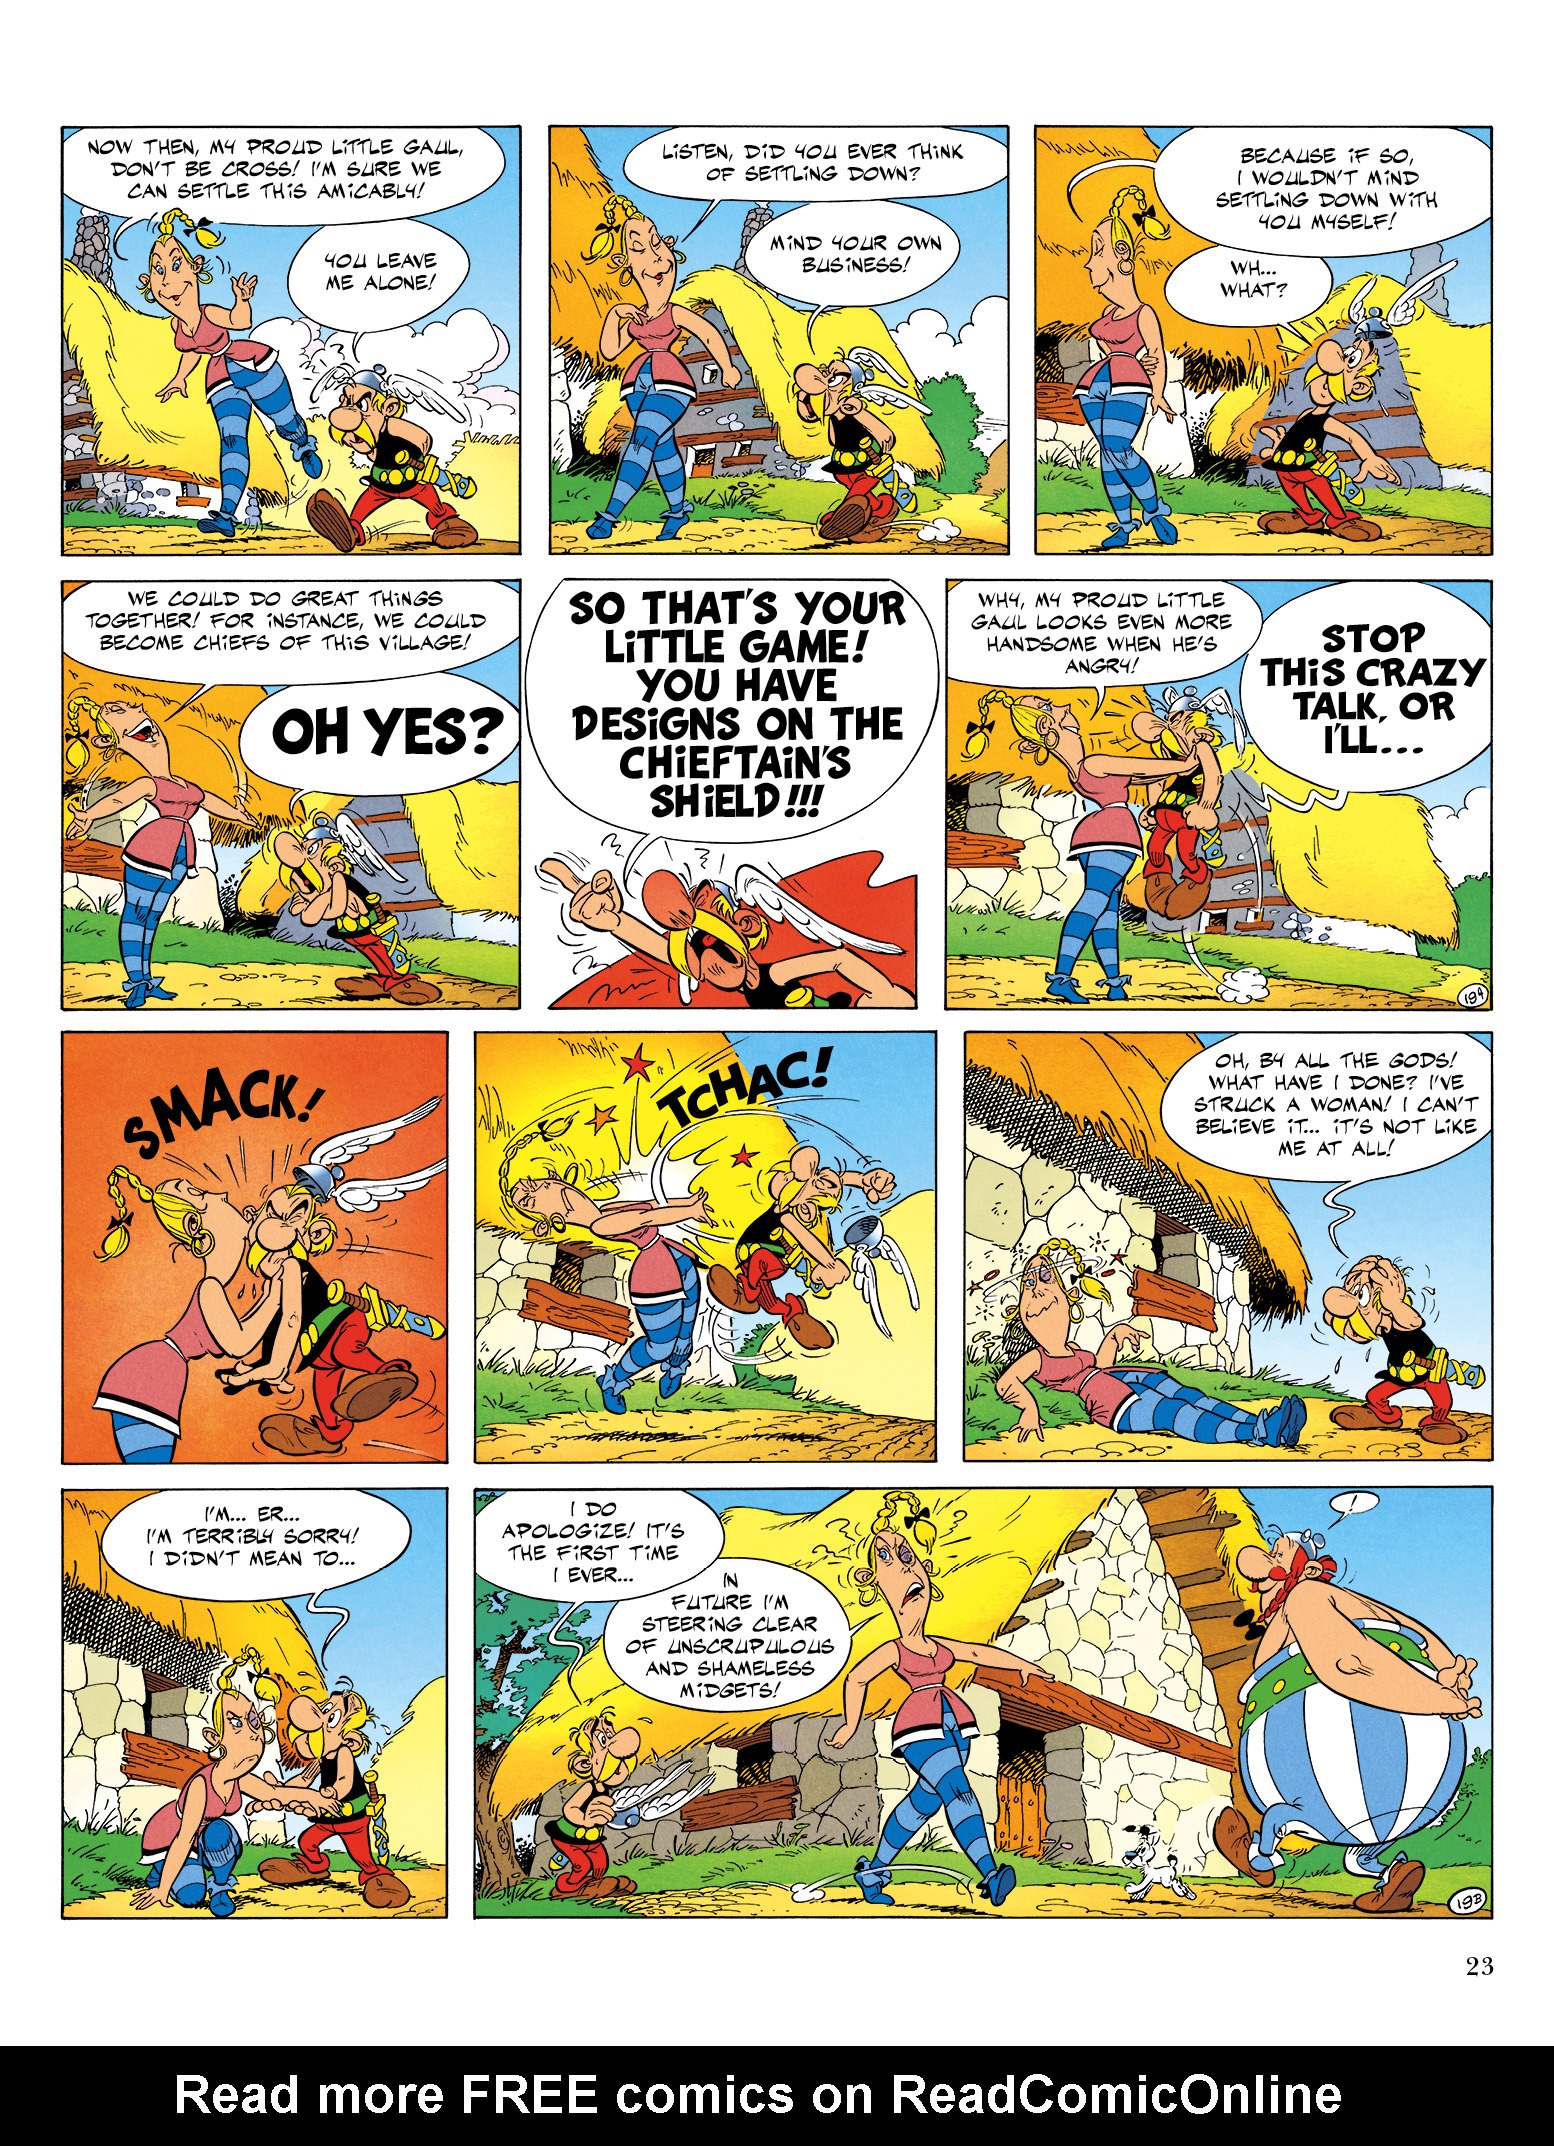 Read online Asterix comic -  Issue #29 - 24